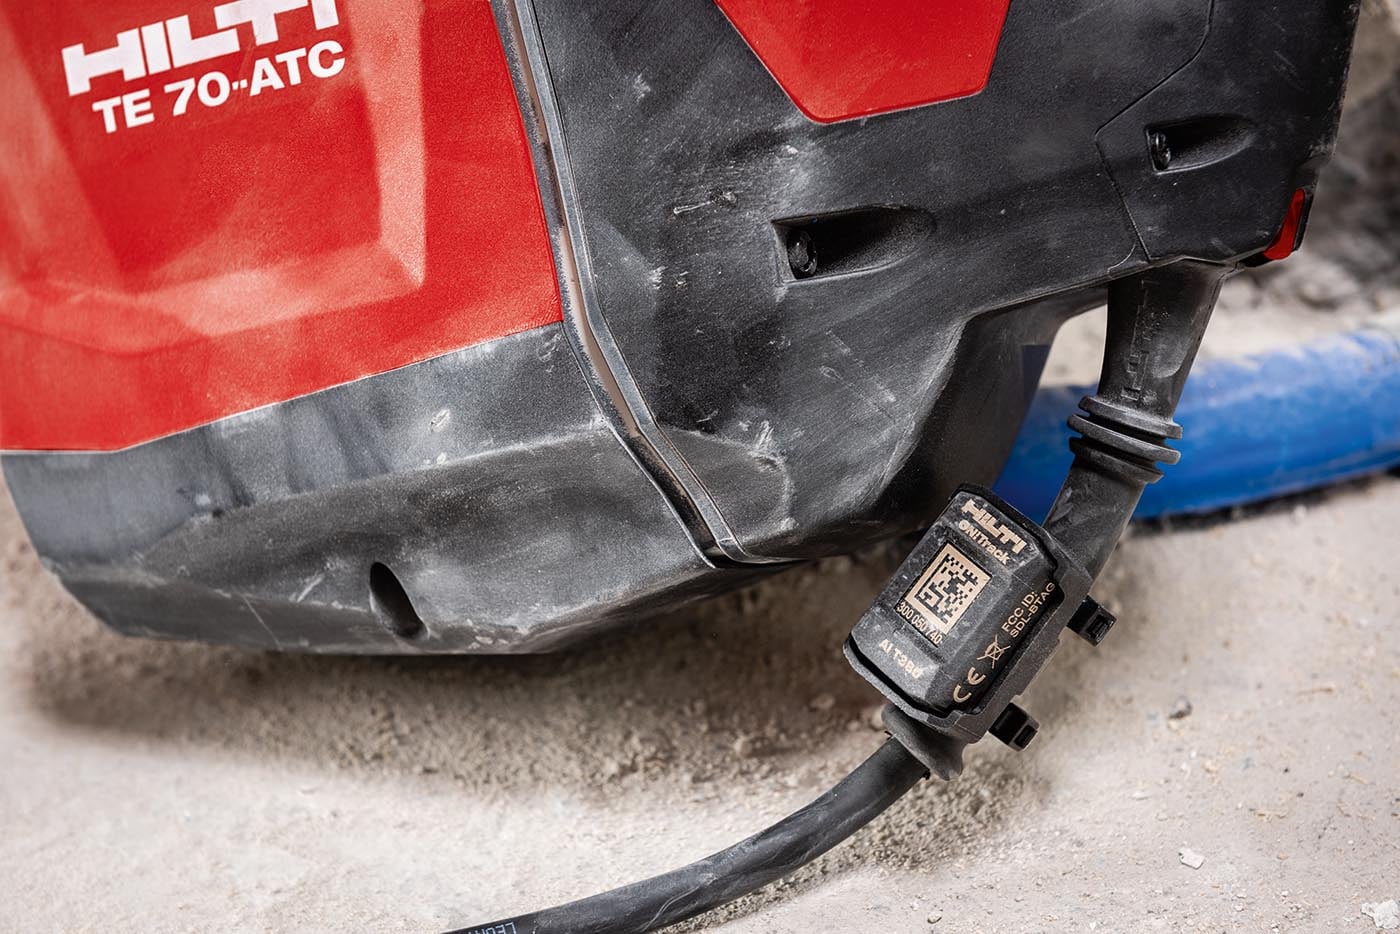 Hilti TE 70-ATC with an ON!Track tag on its power cord